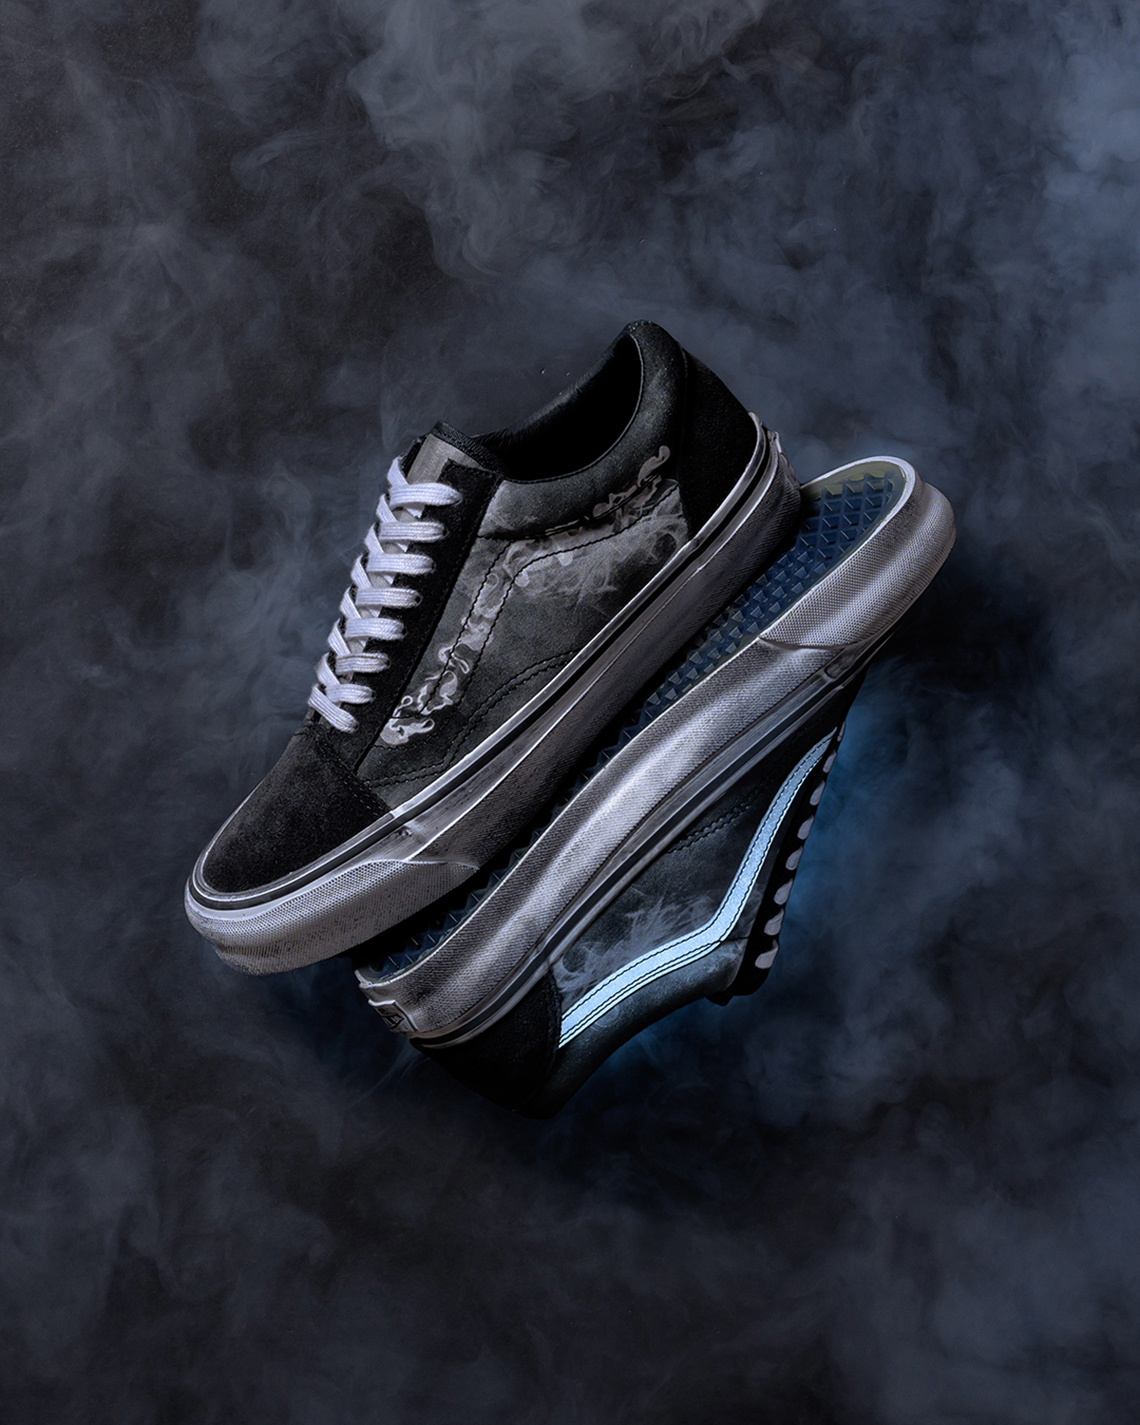 Concepts Vans Vault Smoke And Mirrors Release Date 5